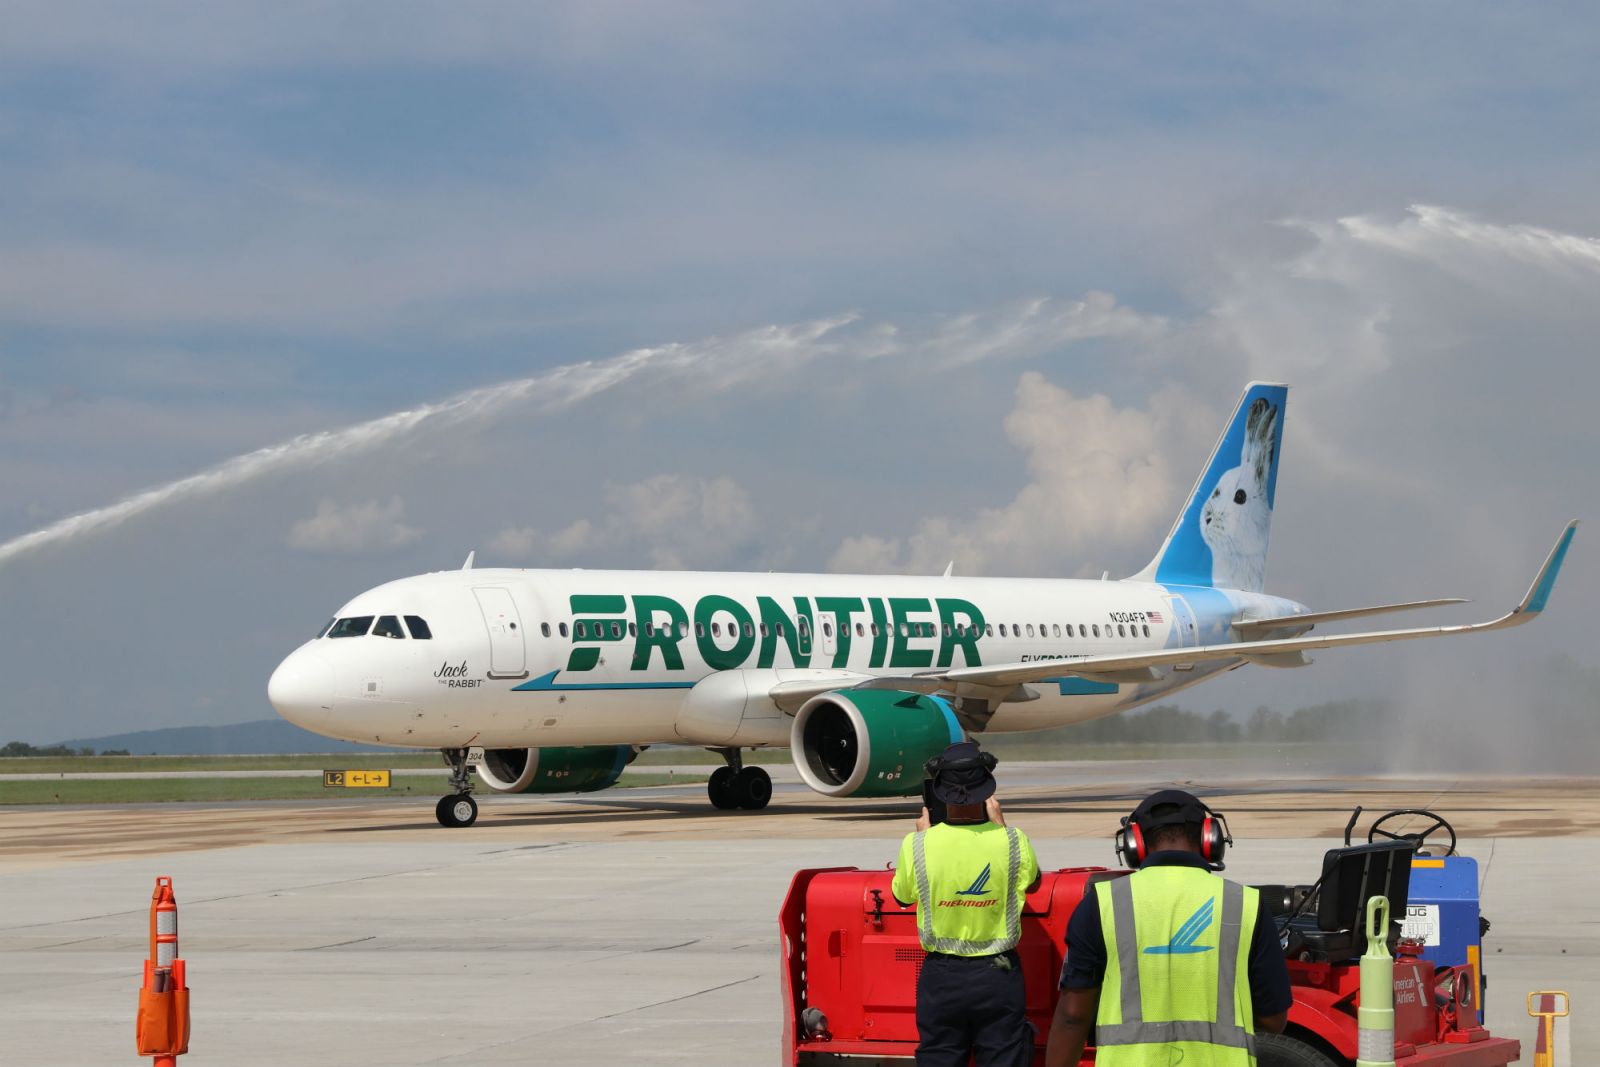 Frontier Airlines was greeted with a salute from the GSPs water cannons. (Photo/Provided)